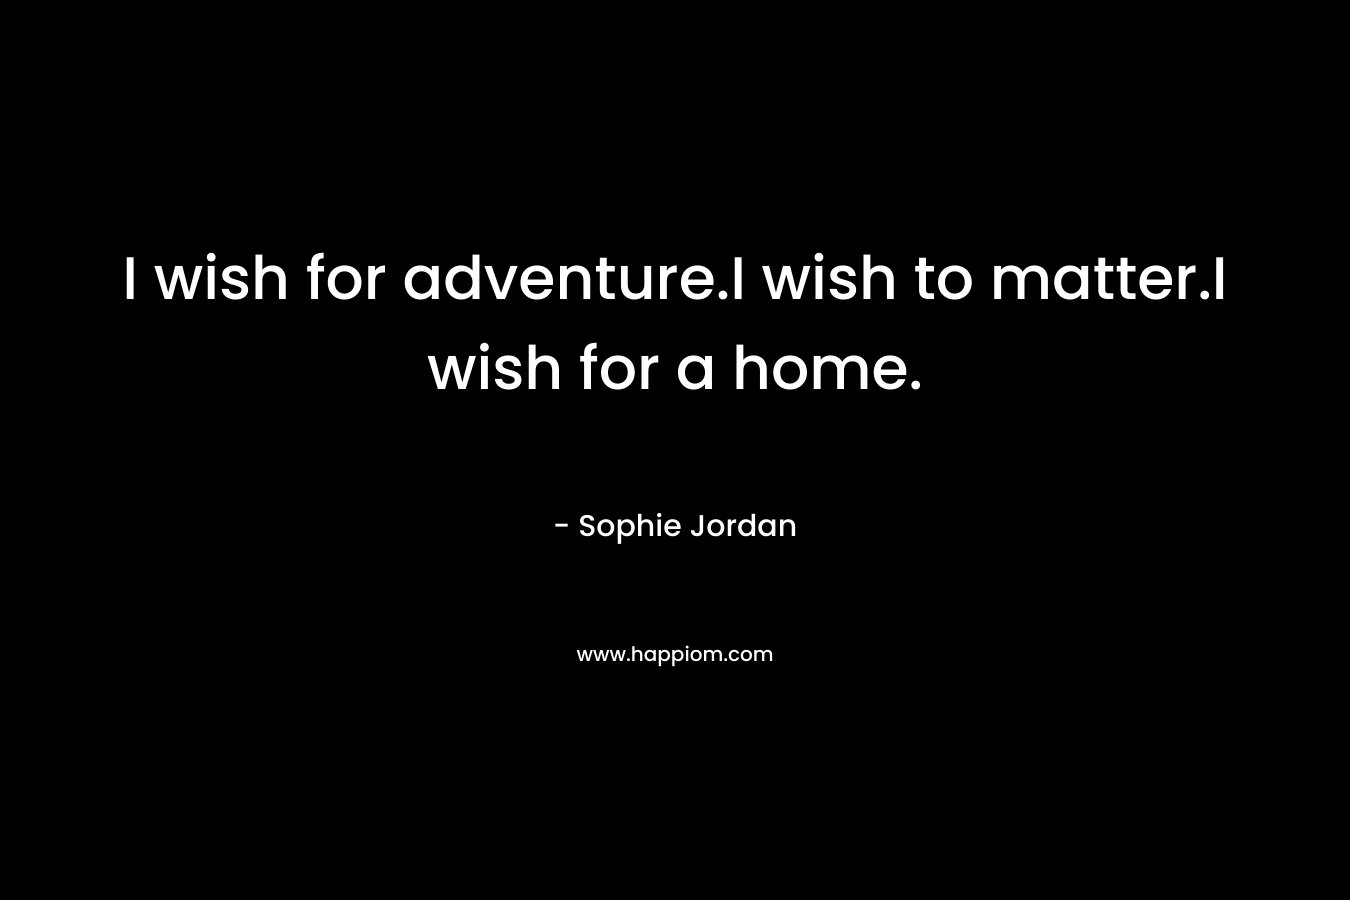 I wish for adventure.I wish to matter.I wish for a home.